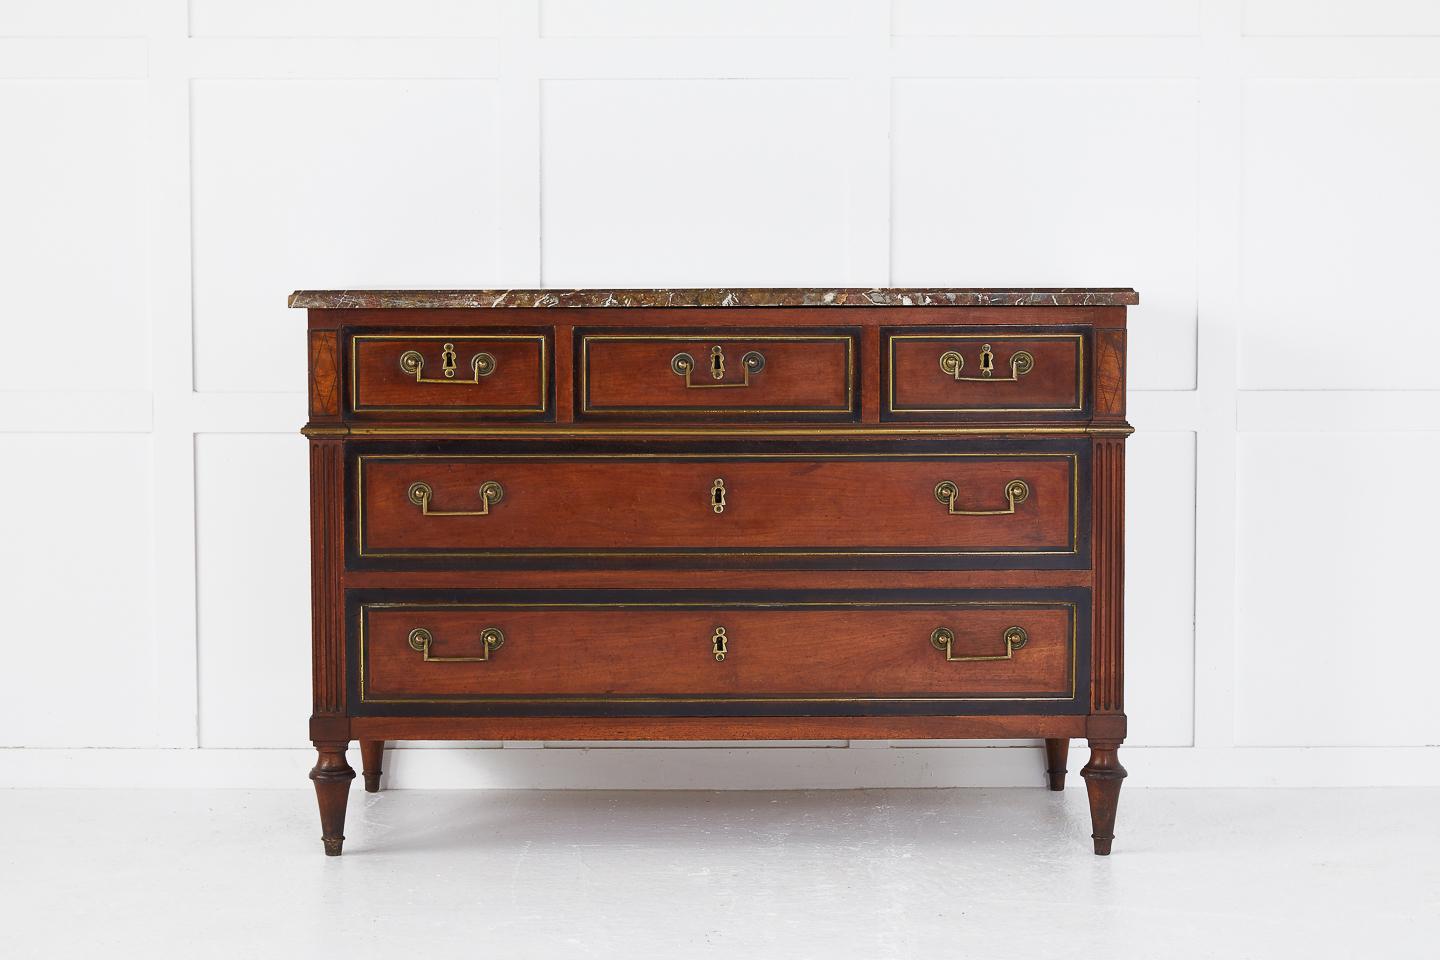 Late 18th-early 19th century French cherrywood commode with ebonized banding and brass mouldings with original marble top.